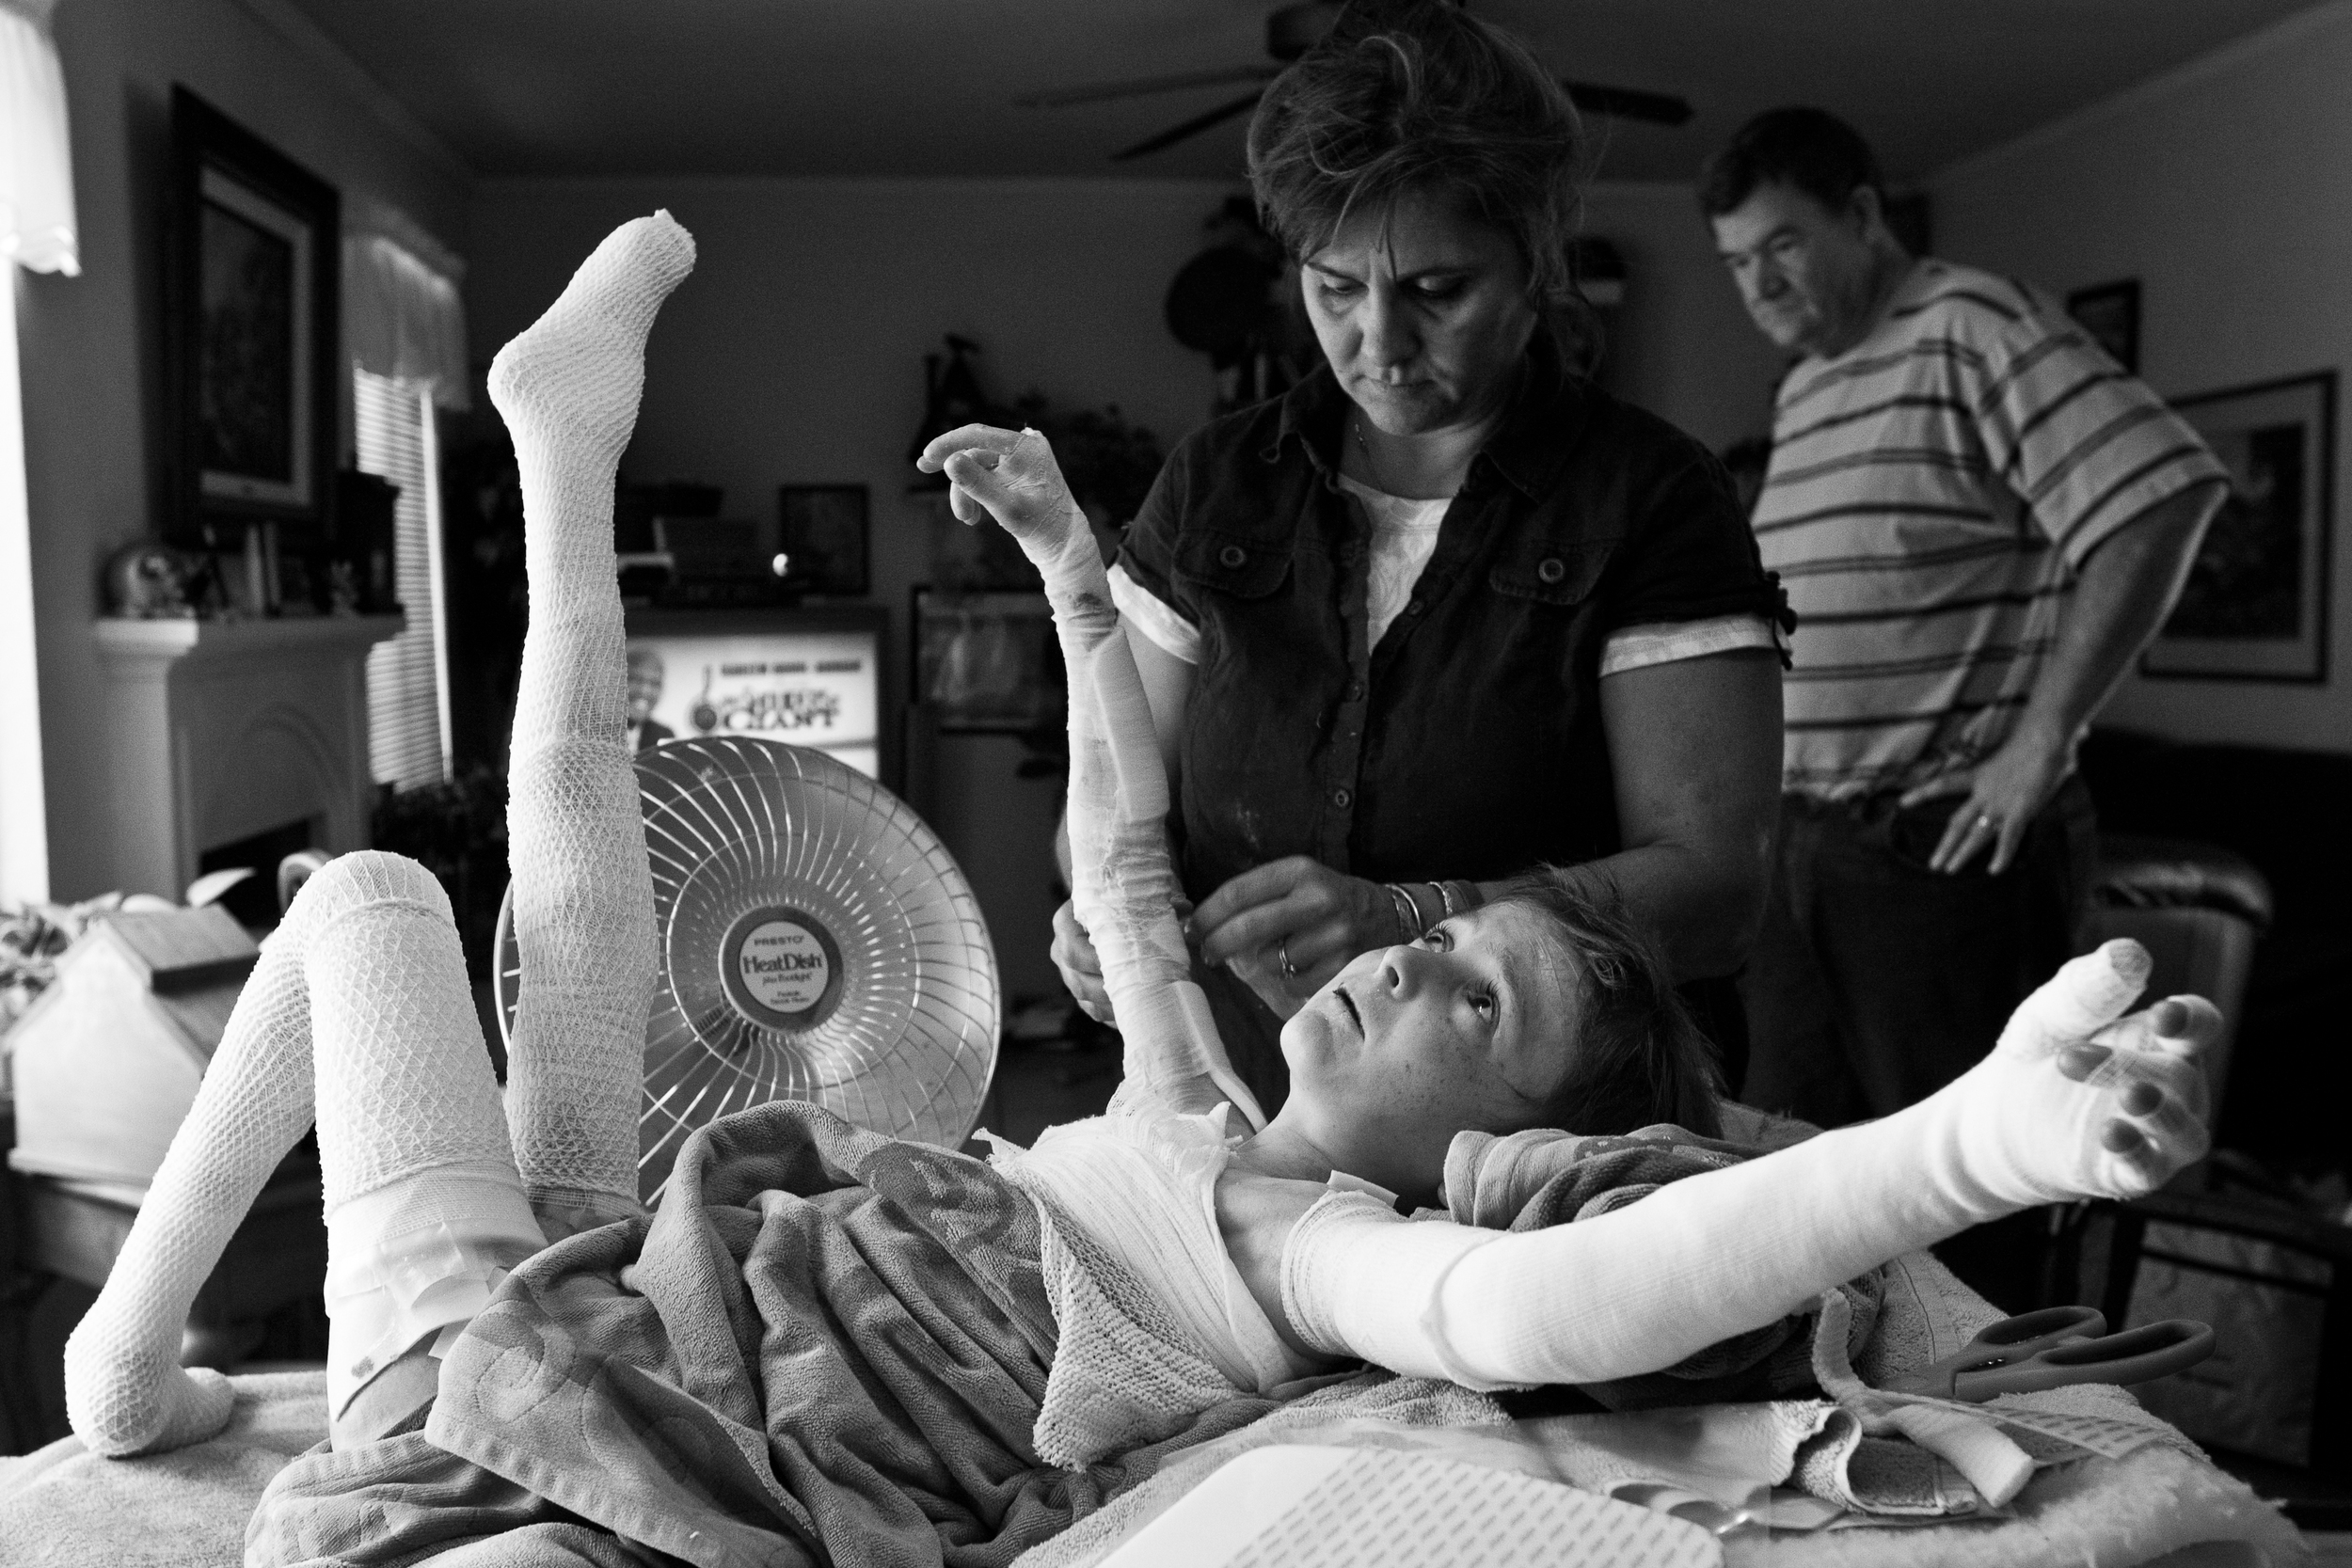  Garrett Spaulding, 12, holds a very uncomfortable position while his mom changes the bandges around his shoulders. Born with Epidermolysis Bullosa, Garrett must have his bandages changed up to 3-times per week. 